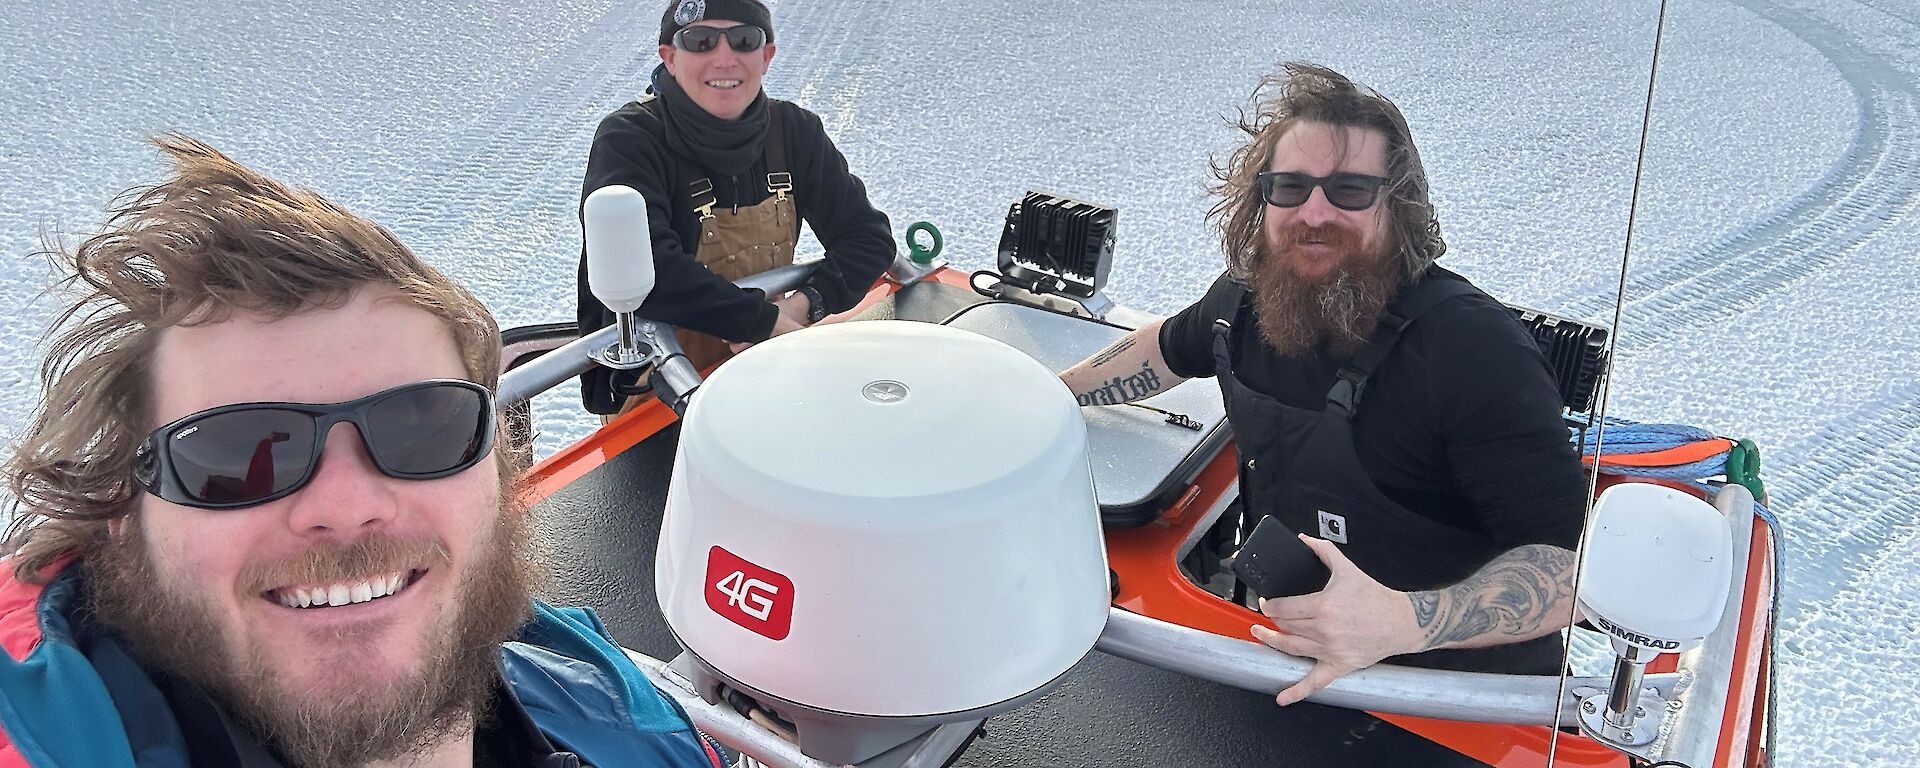 Three dudes in a quad bike on the ice looking very happy